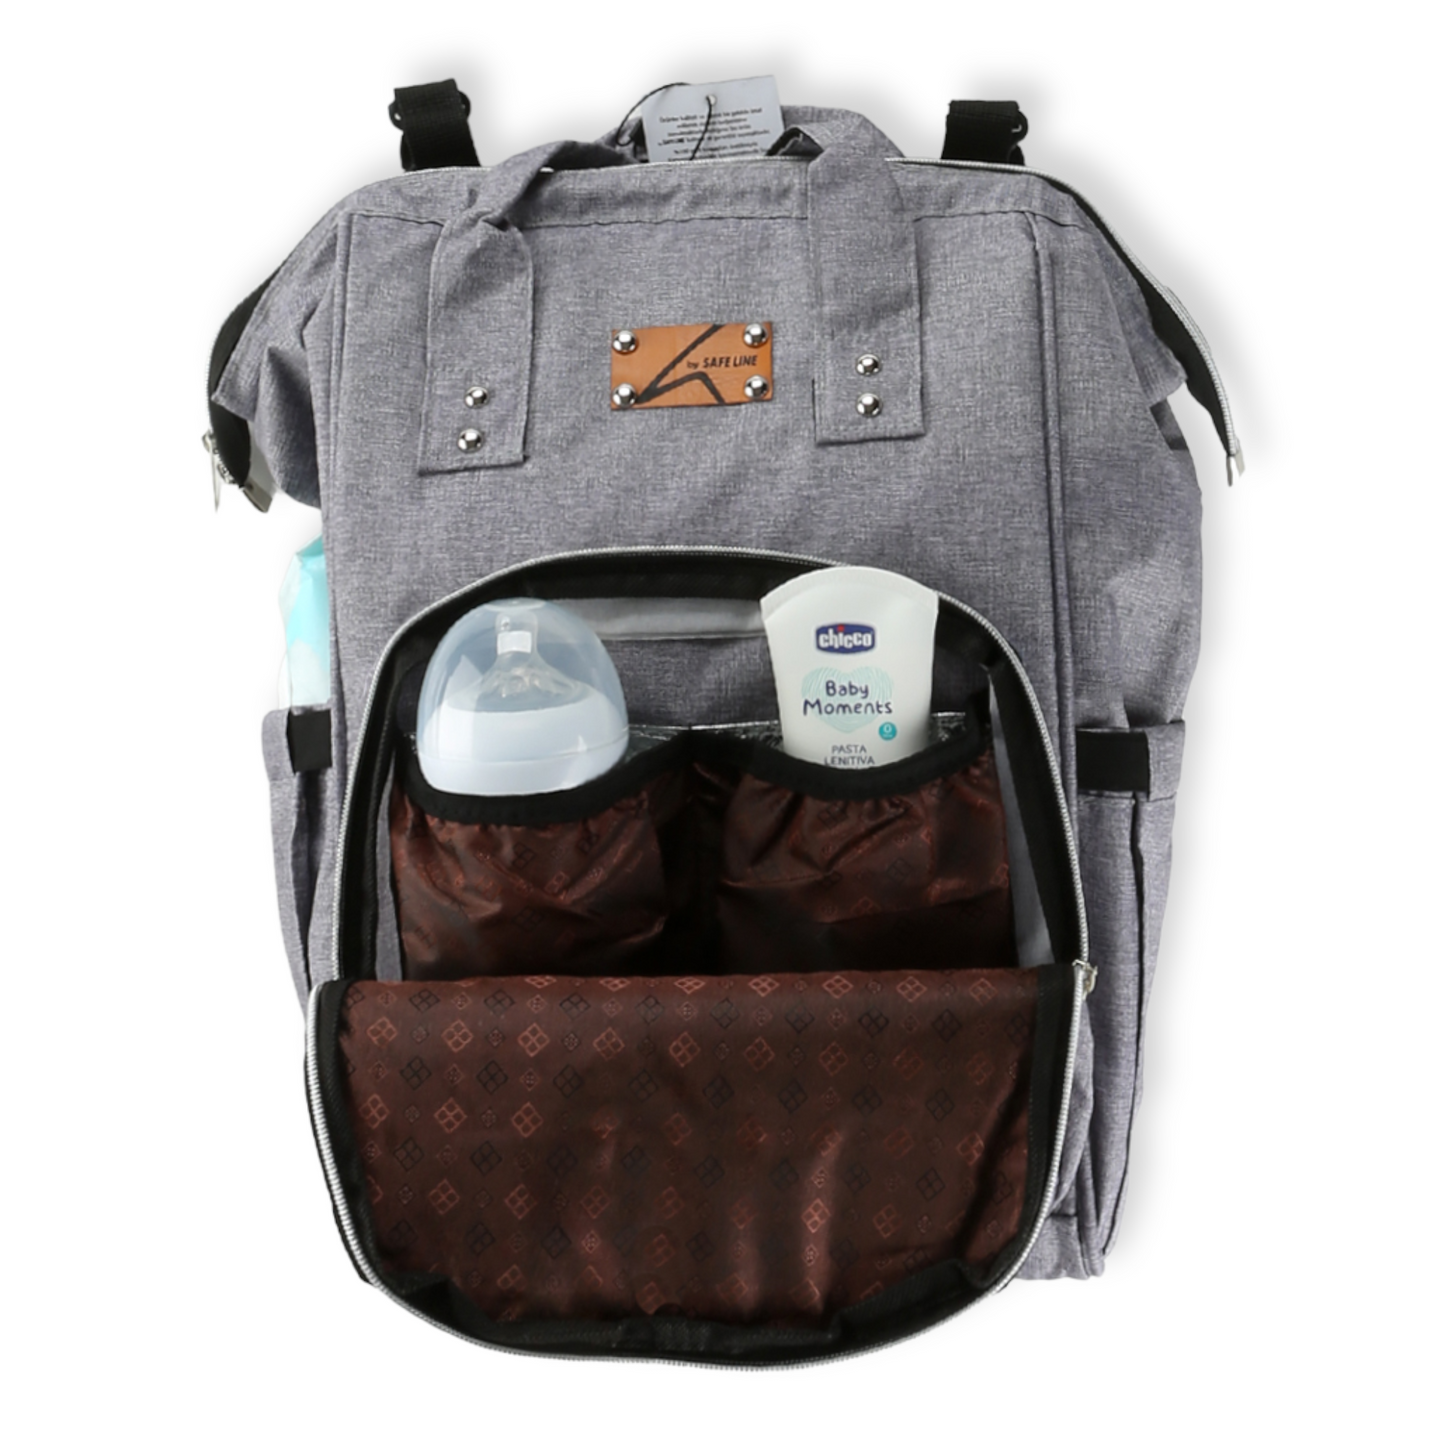 Light Grey Mommy Bag-Bag, Bags, catbabygear, catbag, Changing, Diapers, Grey, Maternity, Nappy, Nursery, Travel-Safe Line-[Too Twee]-[Tootwee]-[baby]-[newborn]-[clothes]-[essentials]-[toys]-[Lebanon]